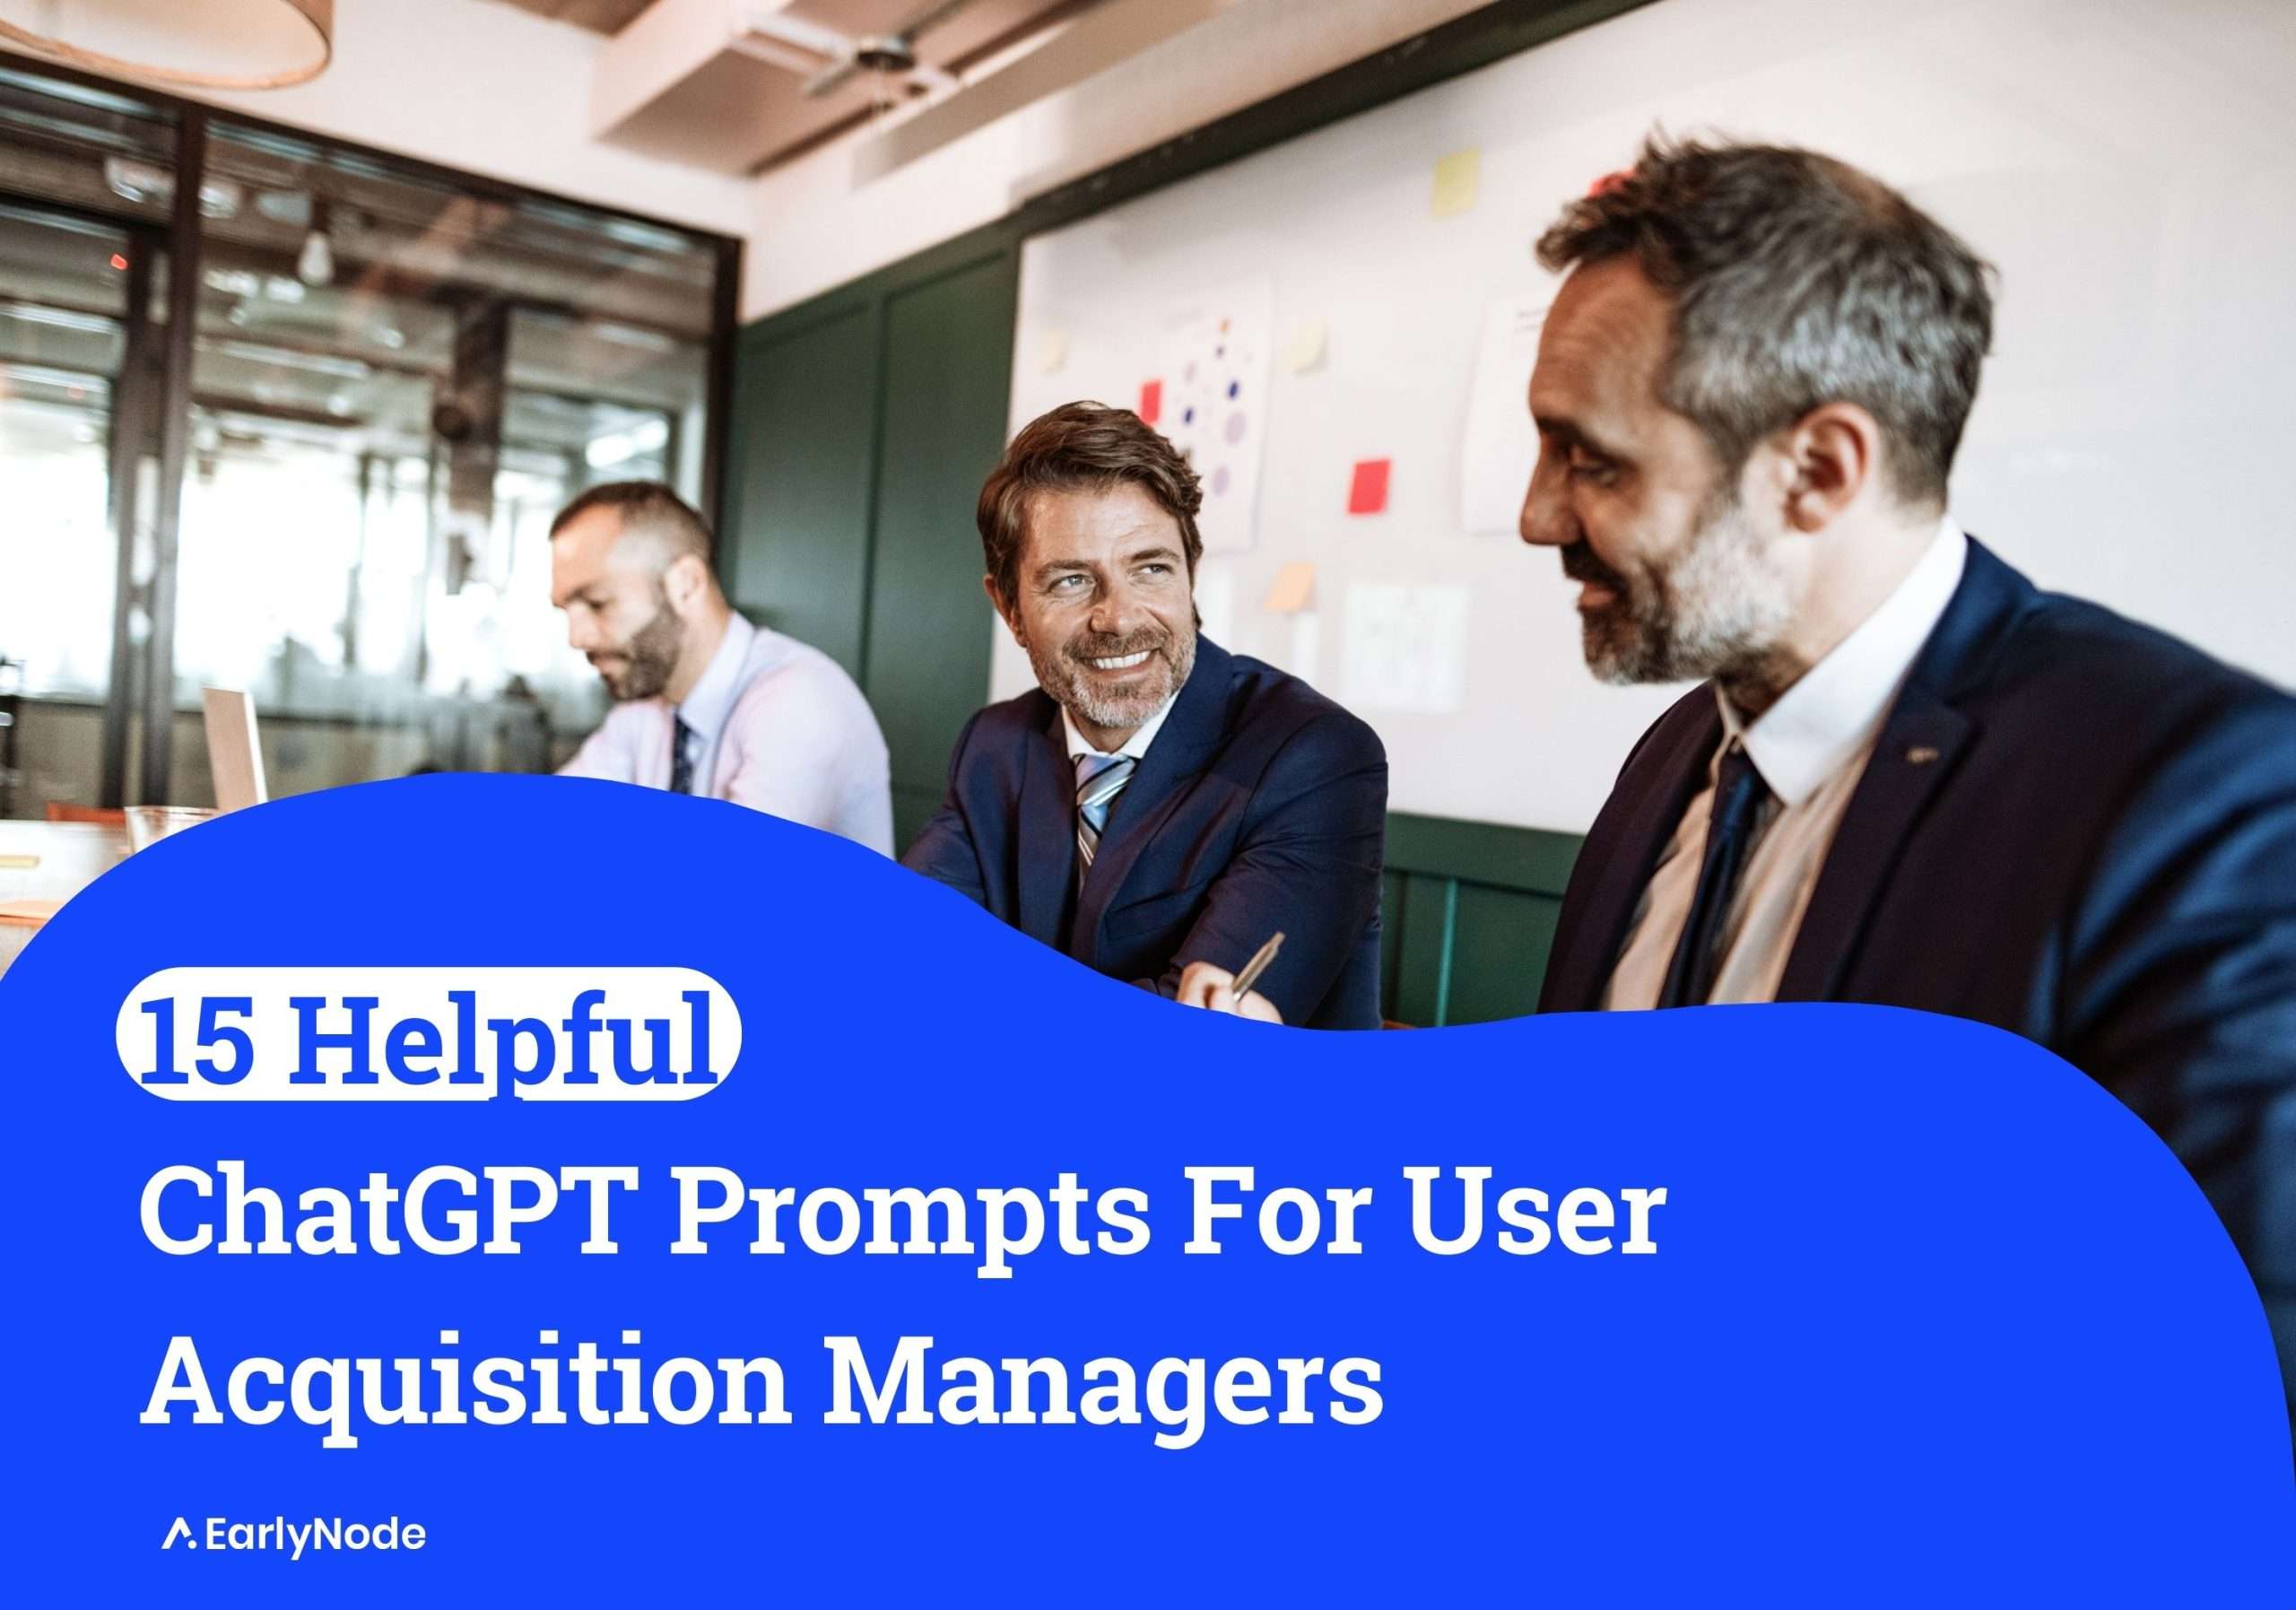 15+ Helpful ChatGPT Prompts for User Acquisition Managers